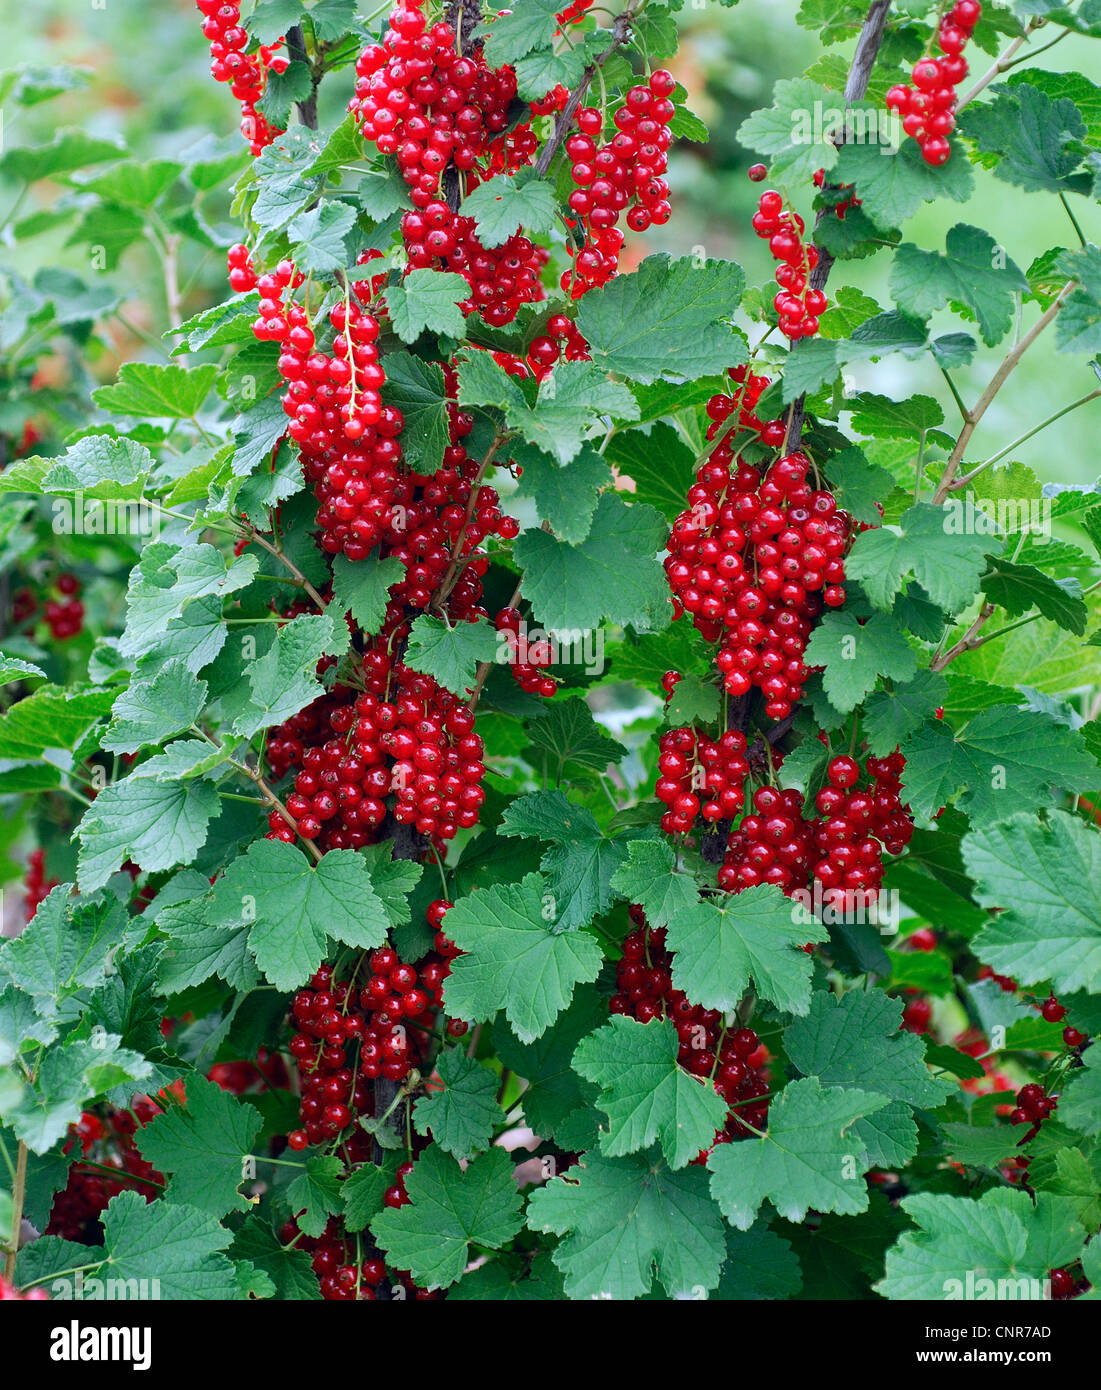 A nord di ribes rosso (ribes rubrum), cultivar 'Utrecht' Foto Stock